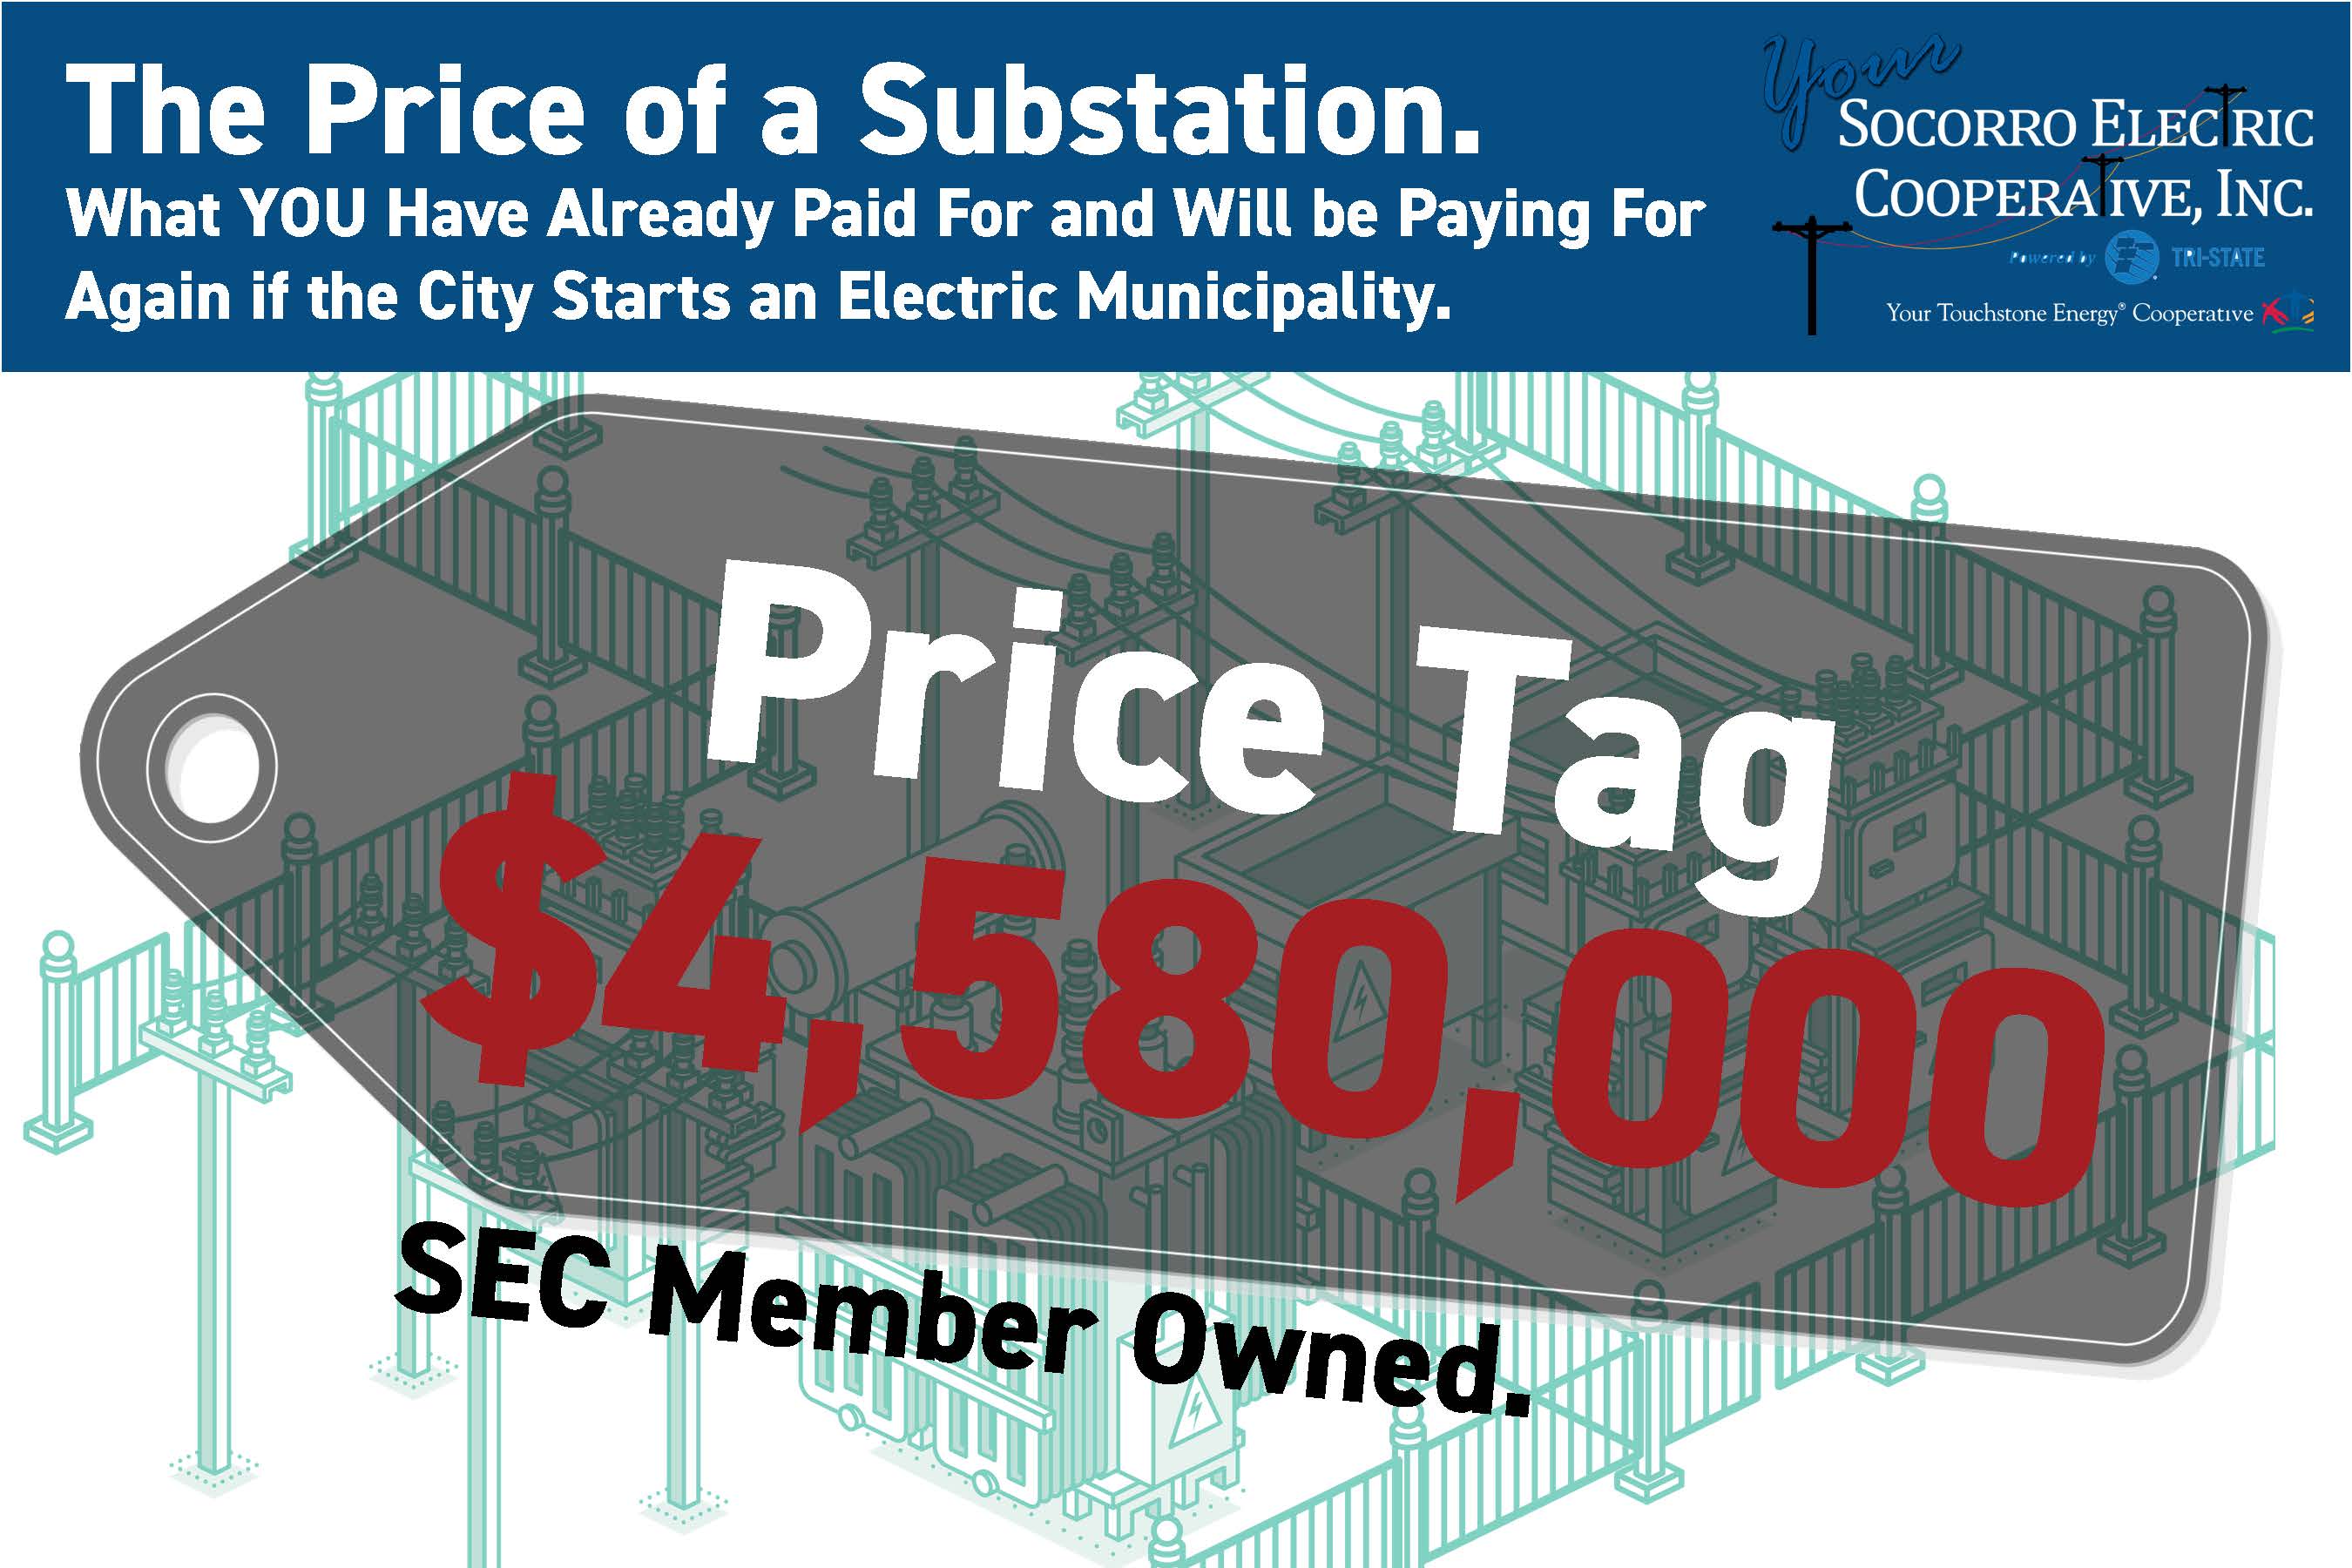 Cost of a Substation